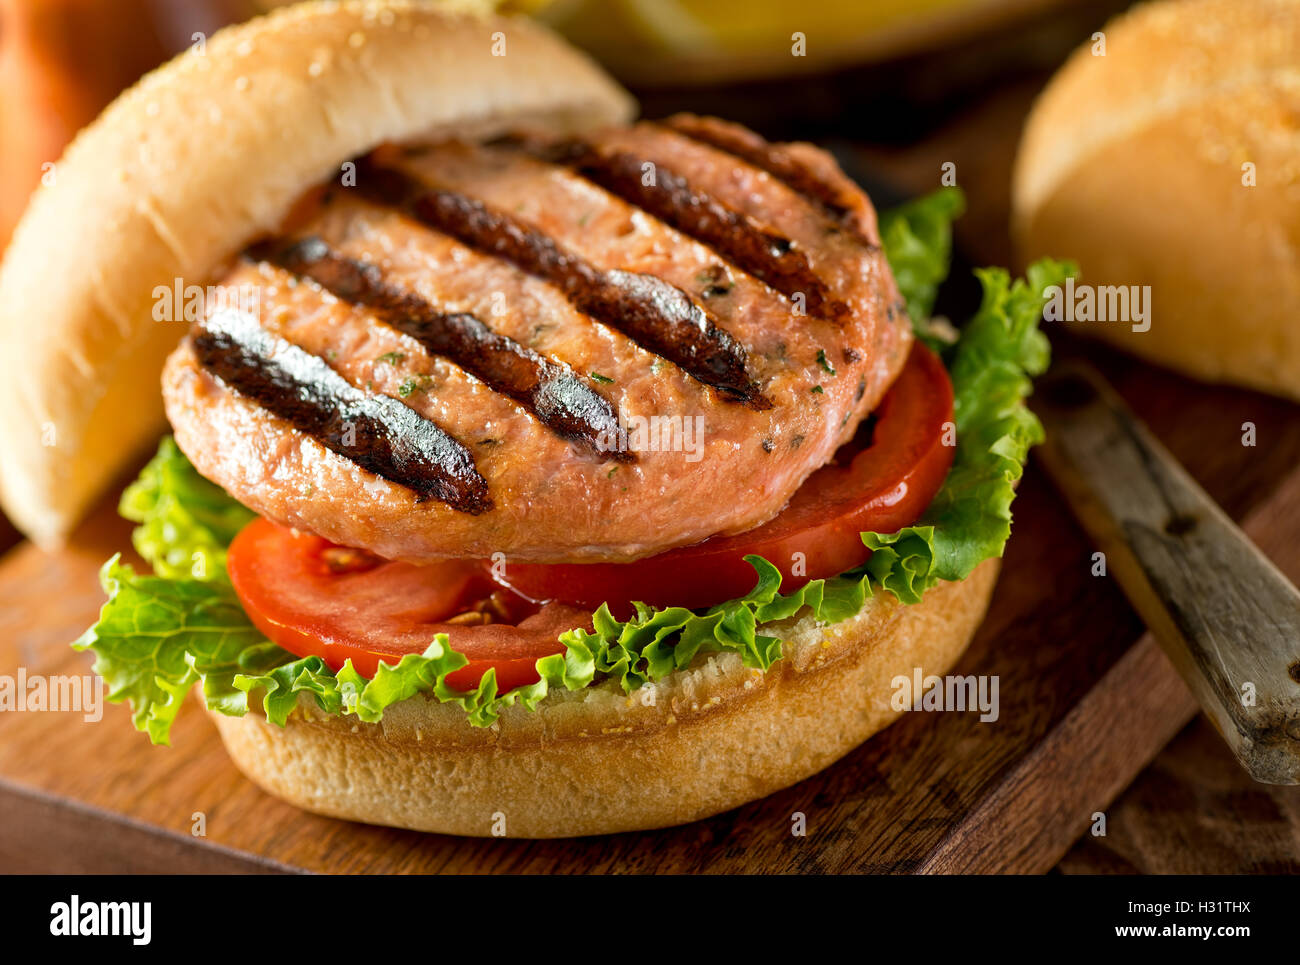 A delicious homemade grilled salmon burger with tomato and lettuce on a bun. Stock Photo